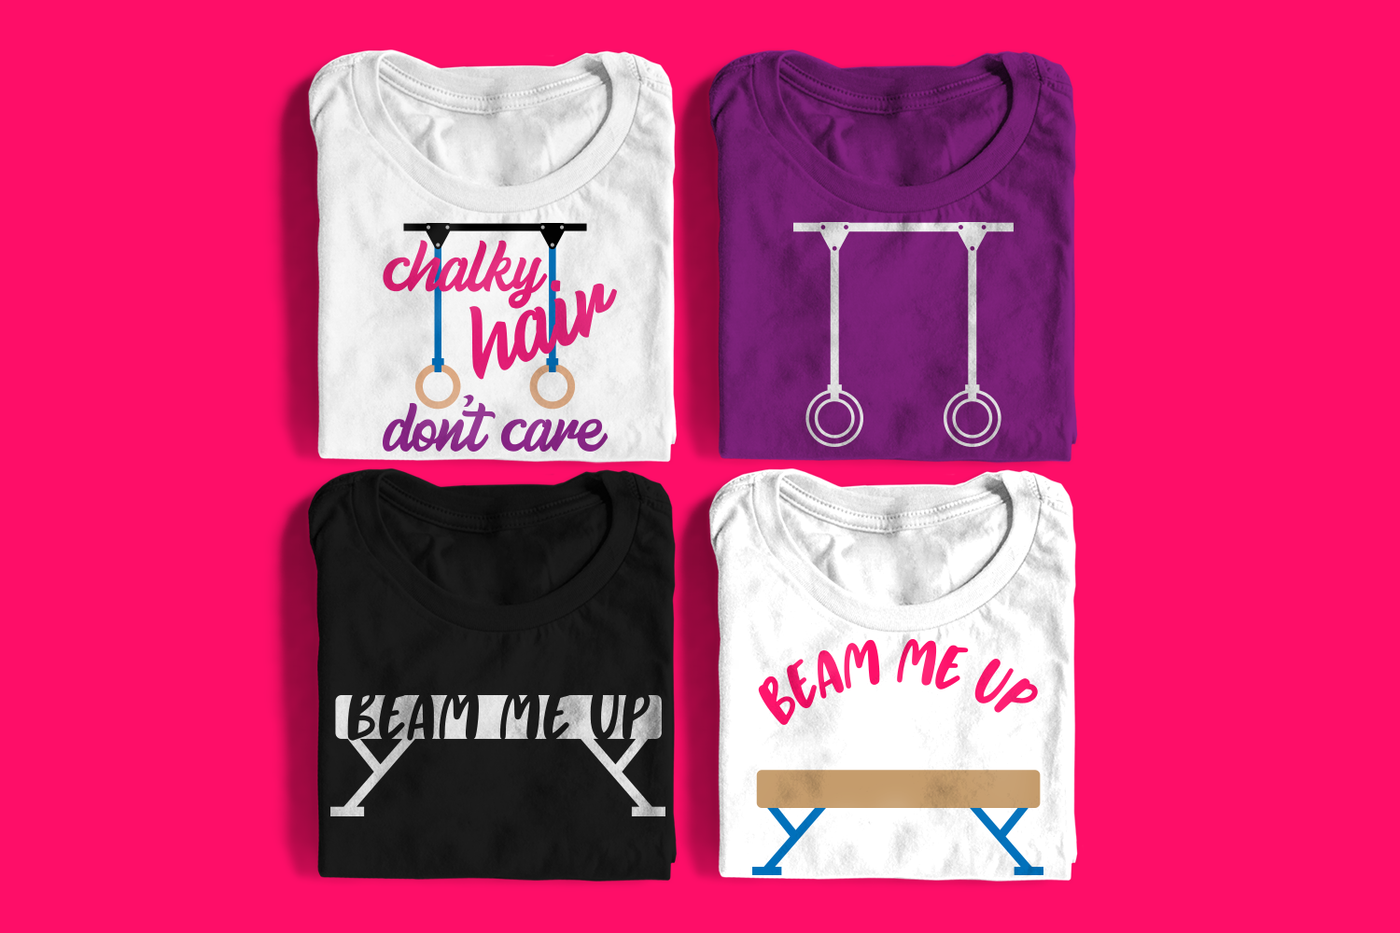 Four folded tees. One has gymnastic rings with "chalky hair don't care" on top, another has a balance beam with "beam me up" knocked out, another has just the rings, and the last has a balance beam with "beam me up" written above.